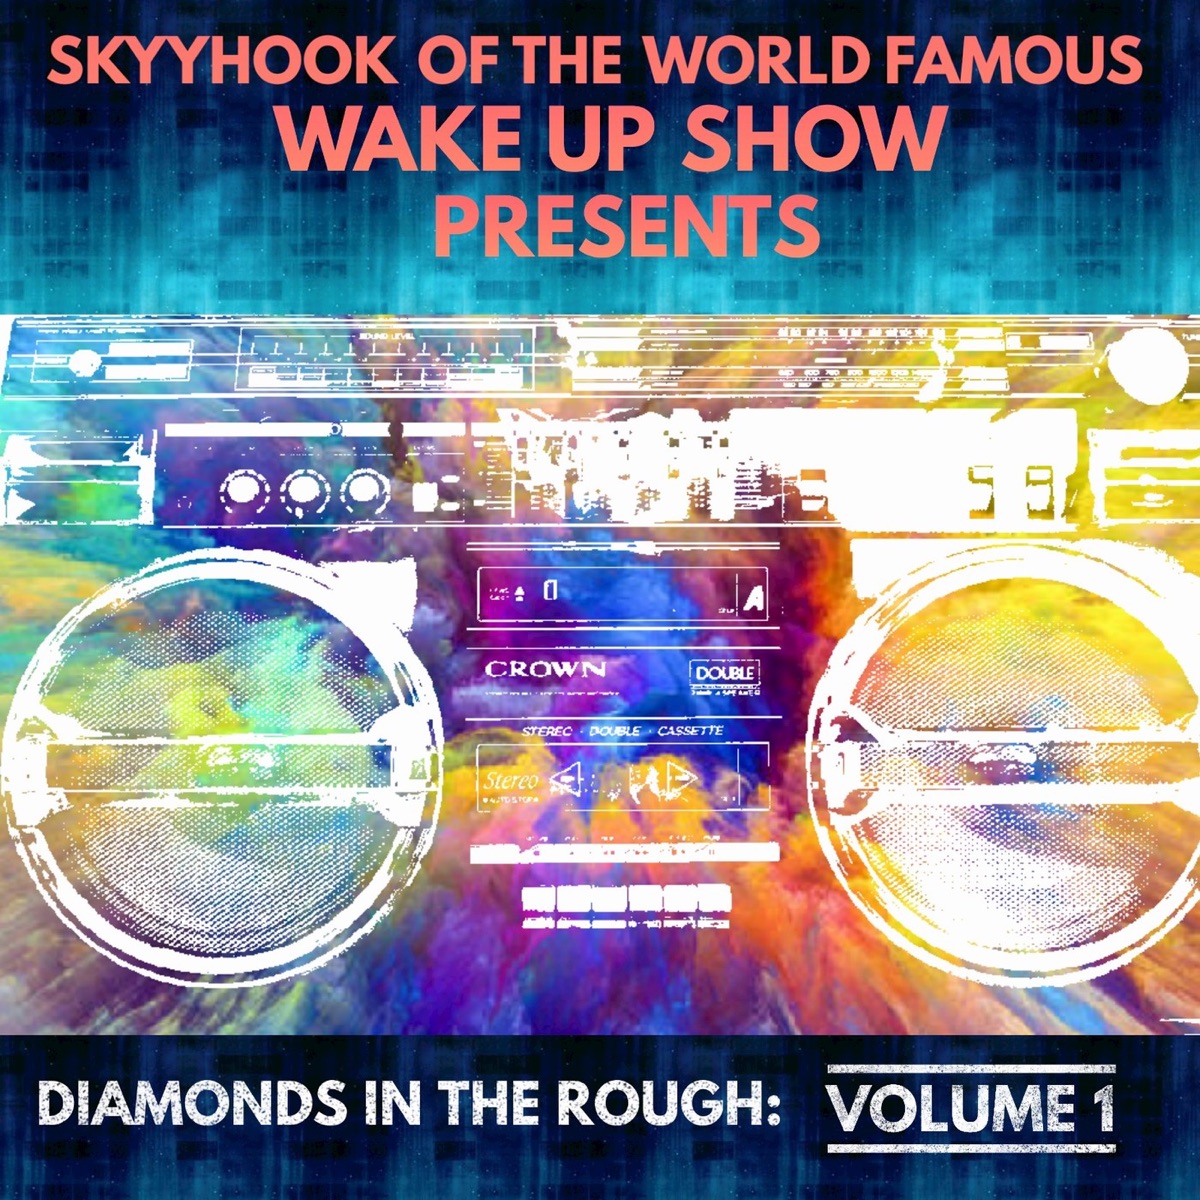 Skyyhook of the World Famous Wake Up Show Presents: Diamonds in the Rough,  Vol. 1 - Album by Various Artists - Apple Music